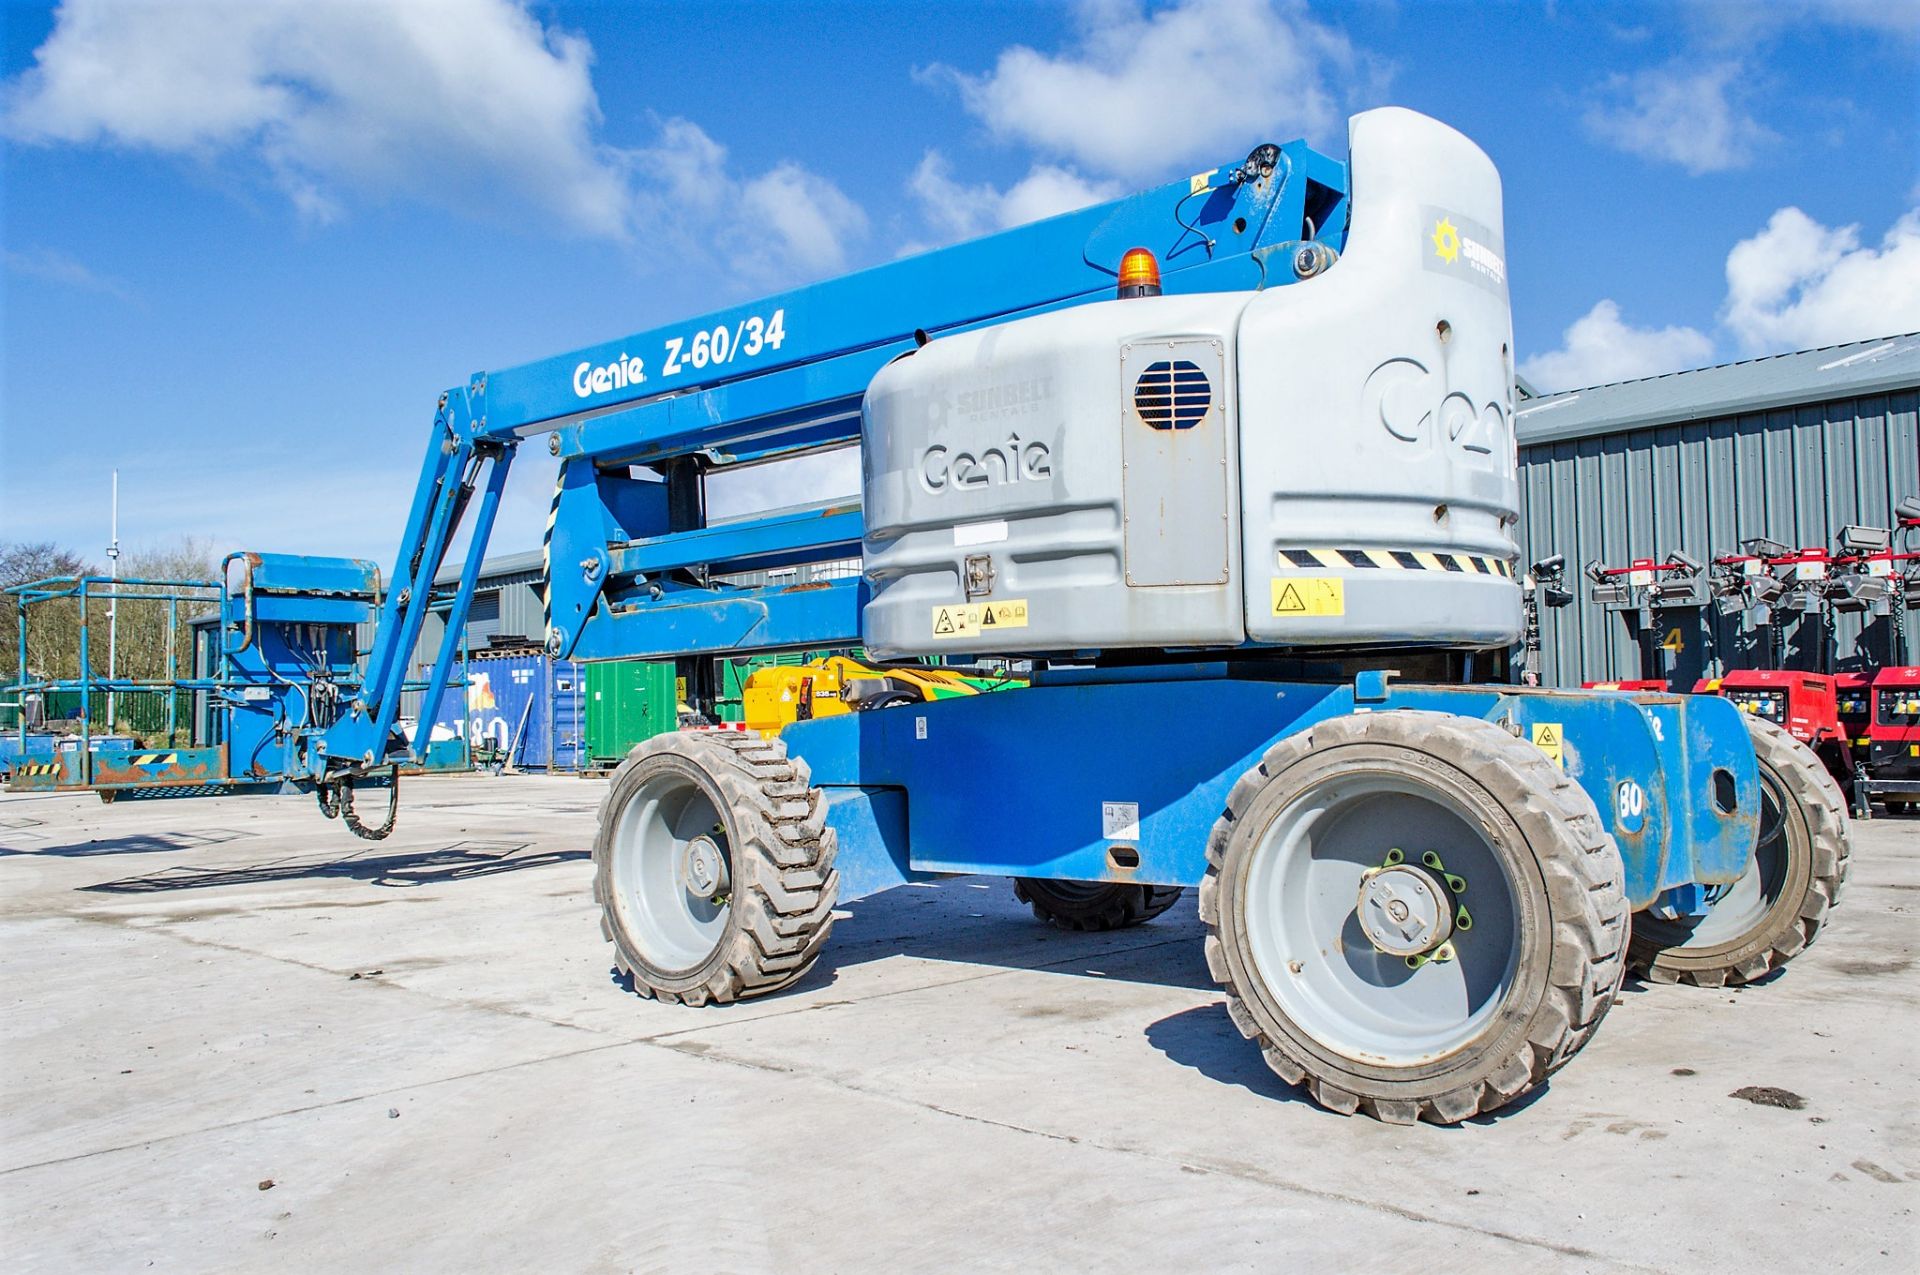 Genie Z60/34 diesel/electric articulated boom lift access platform Year: 2014 S/N: Z6014-13483 - Image 4 of 17